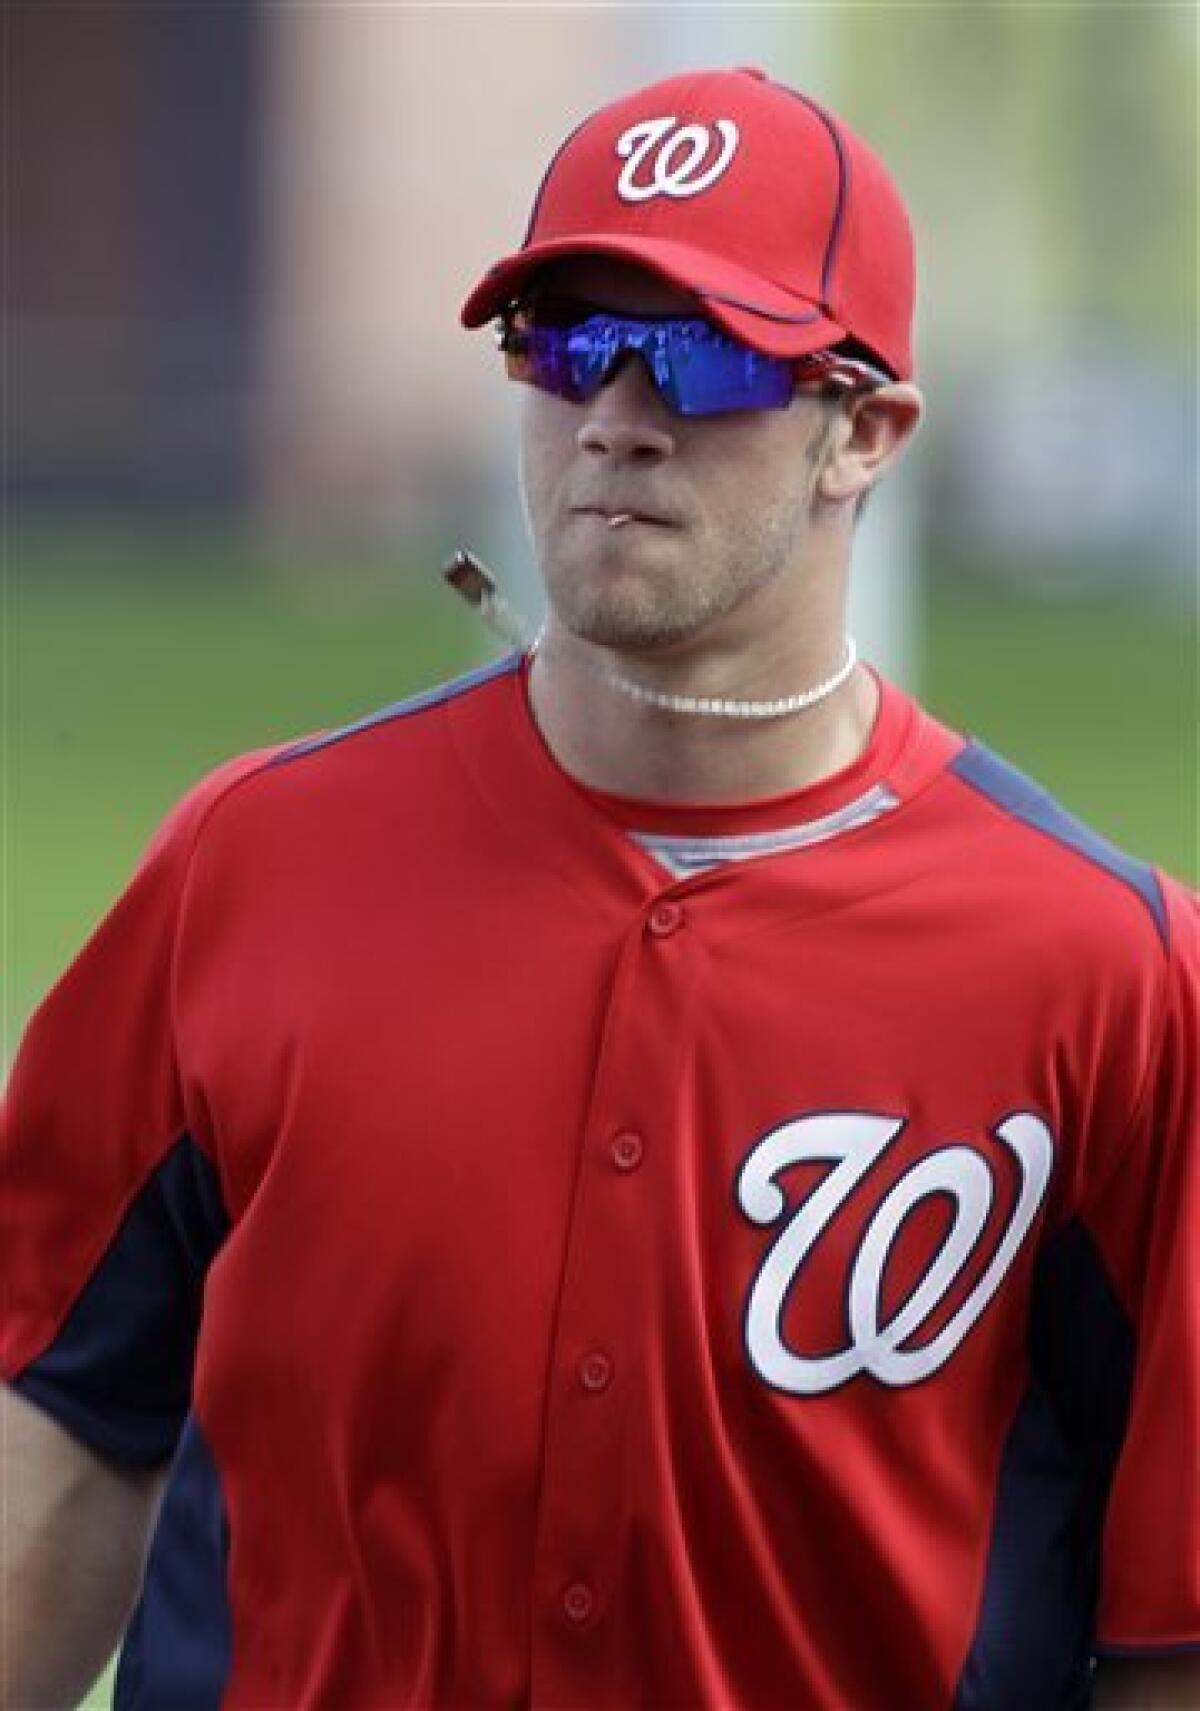 Bryce Harper makes his debut in the Florida Instructional League